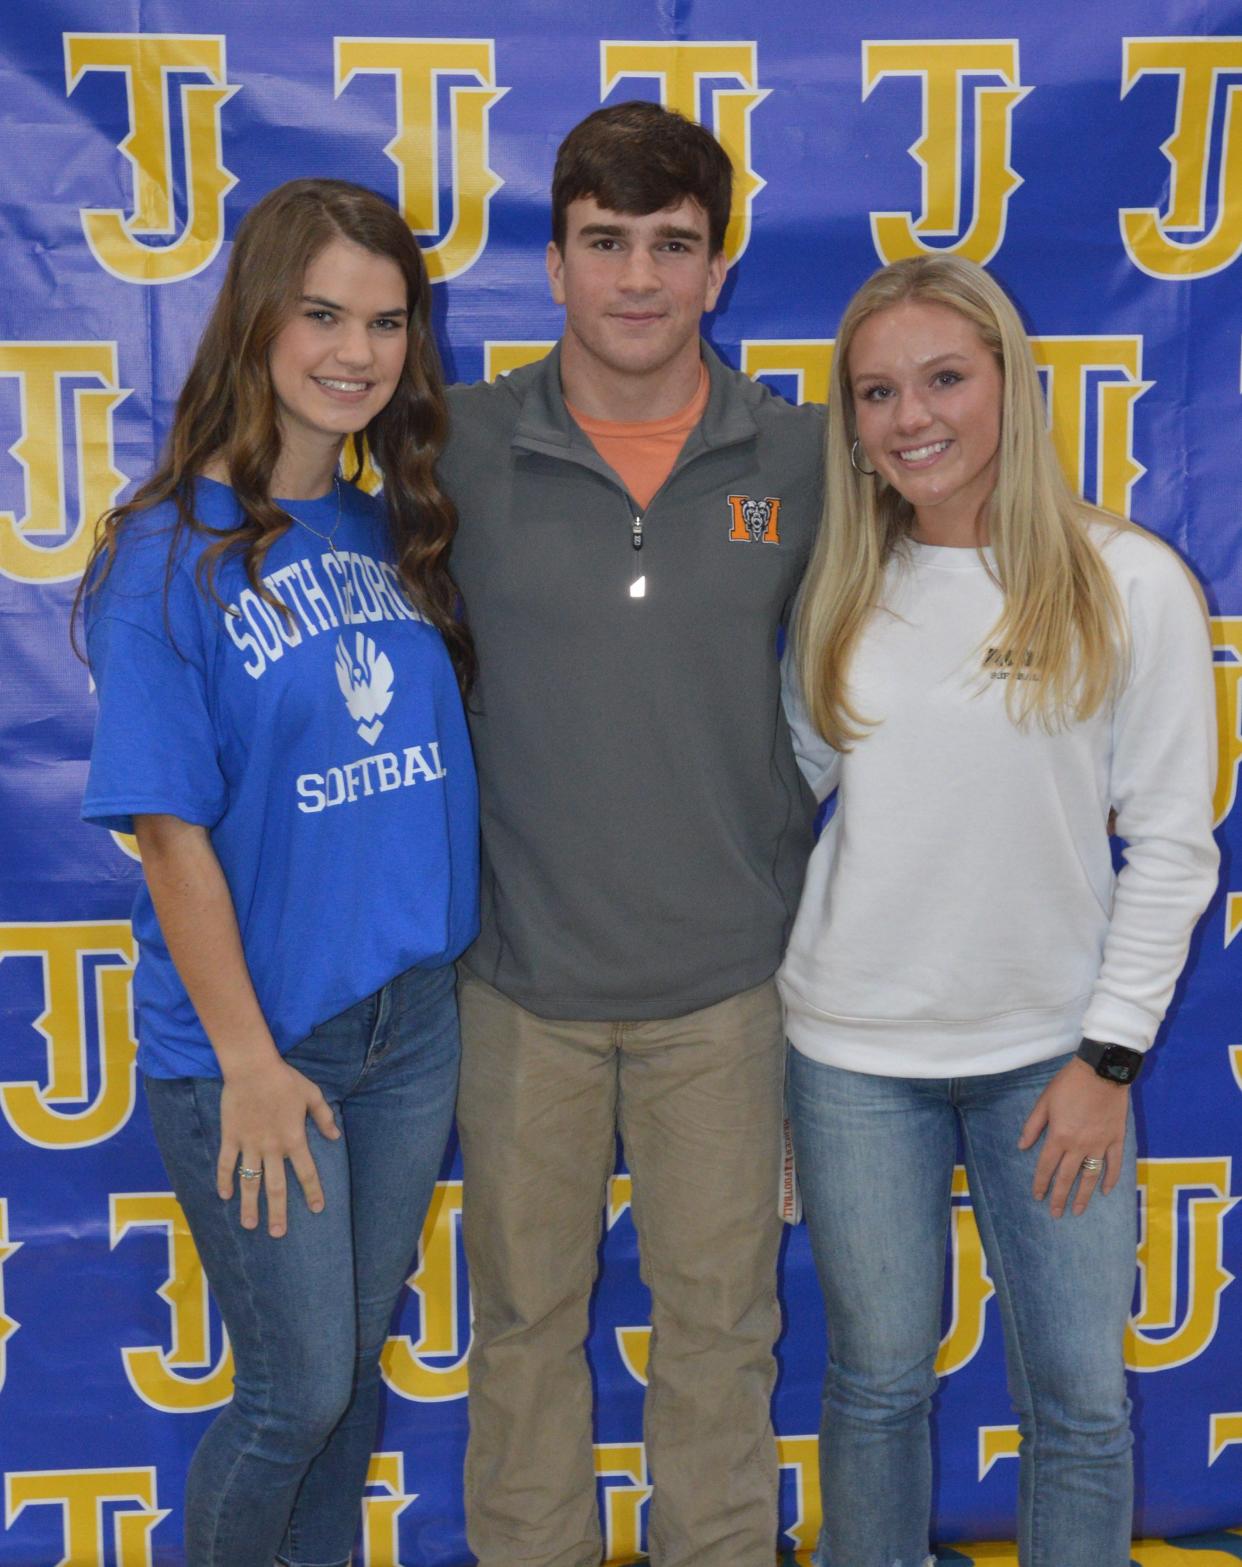 Thomas Jefferson Academy seniors Zoie Irby, John John Durden and Whitney Wells all signed letters of intent to play college ball.